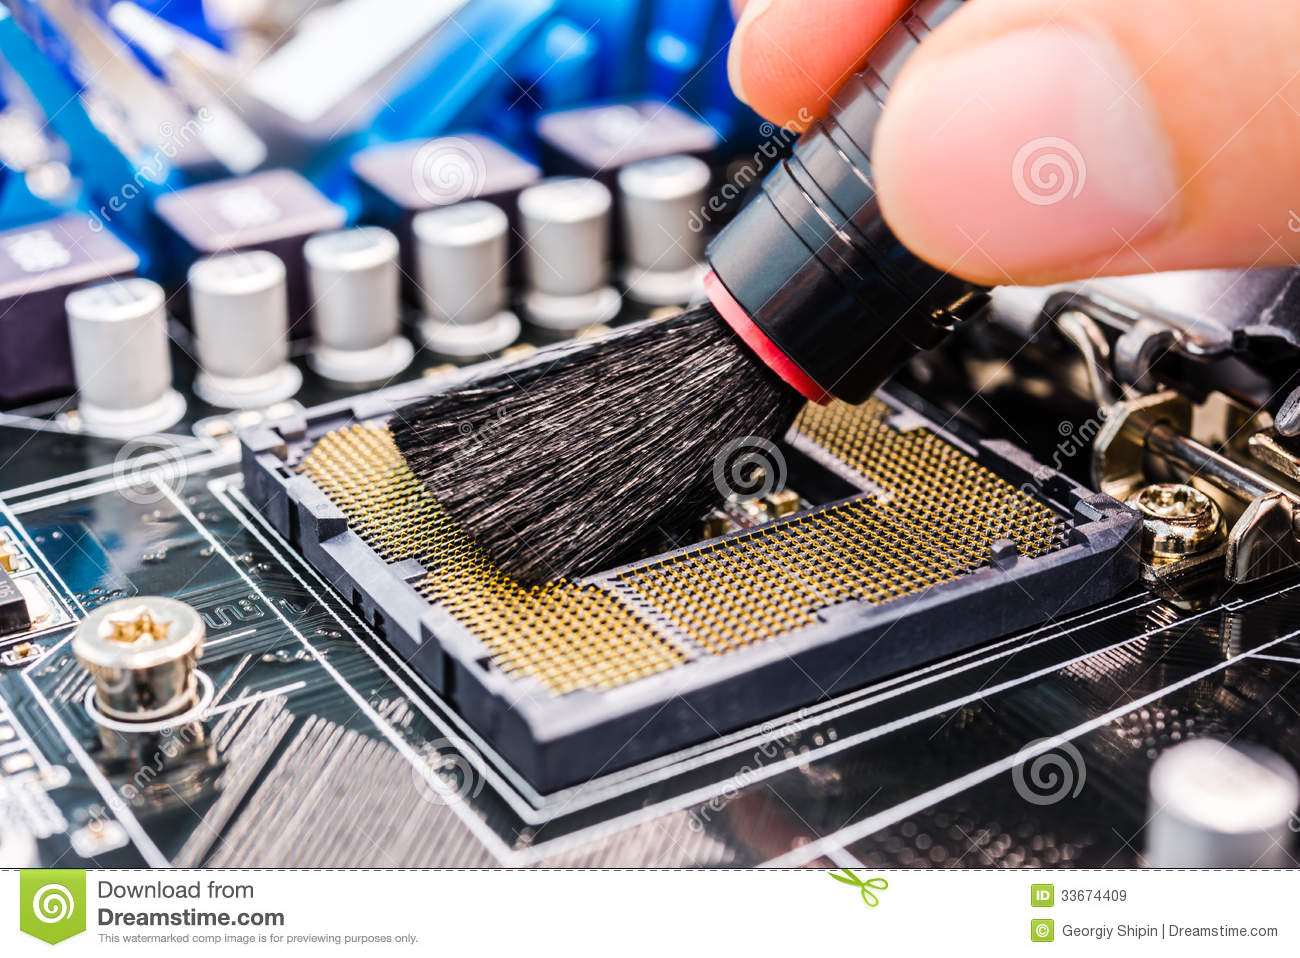 computer-cleaning-main-parts-brush-33674409